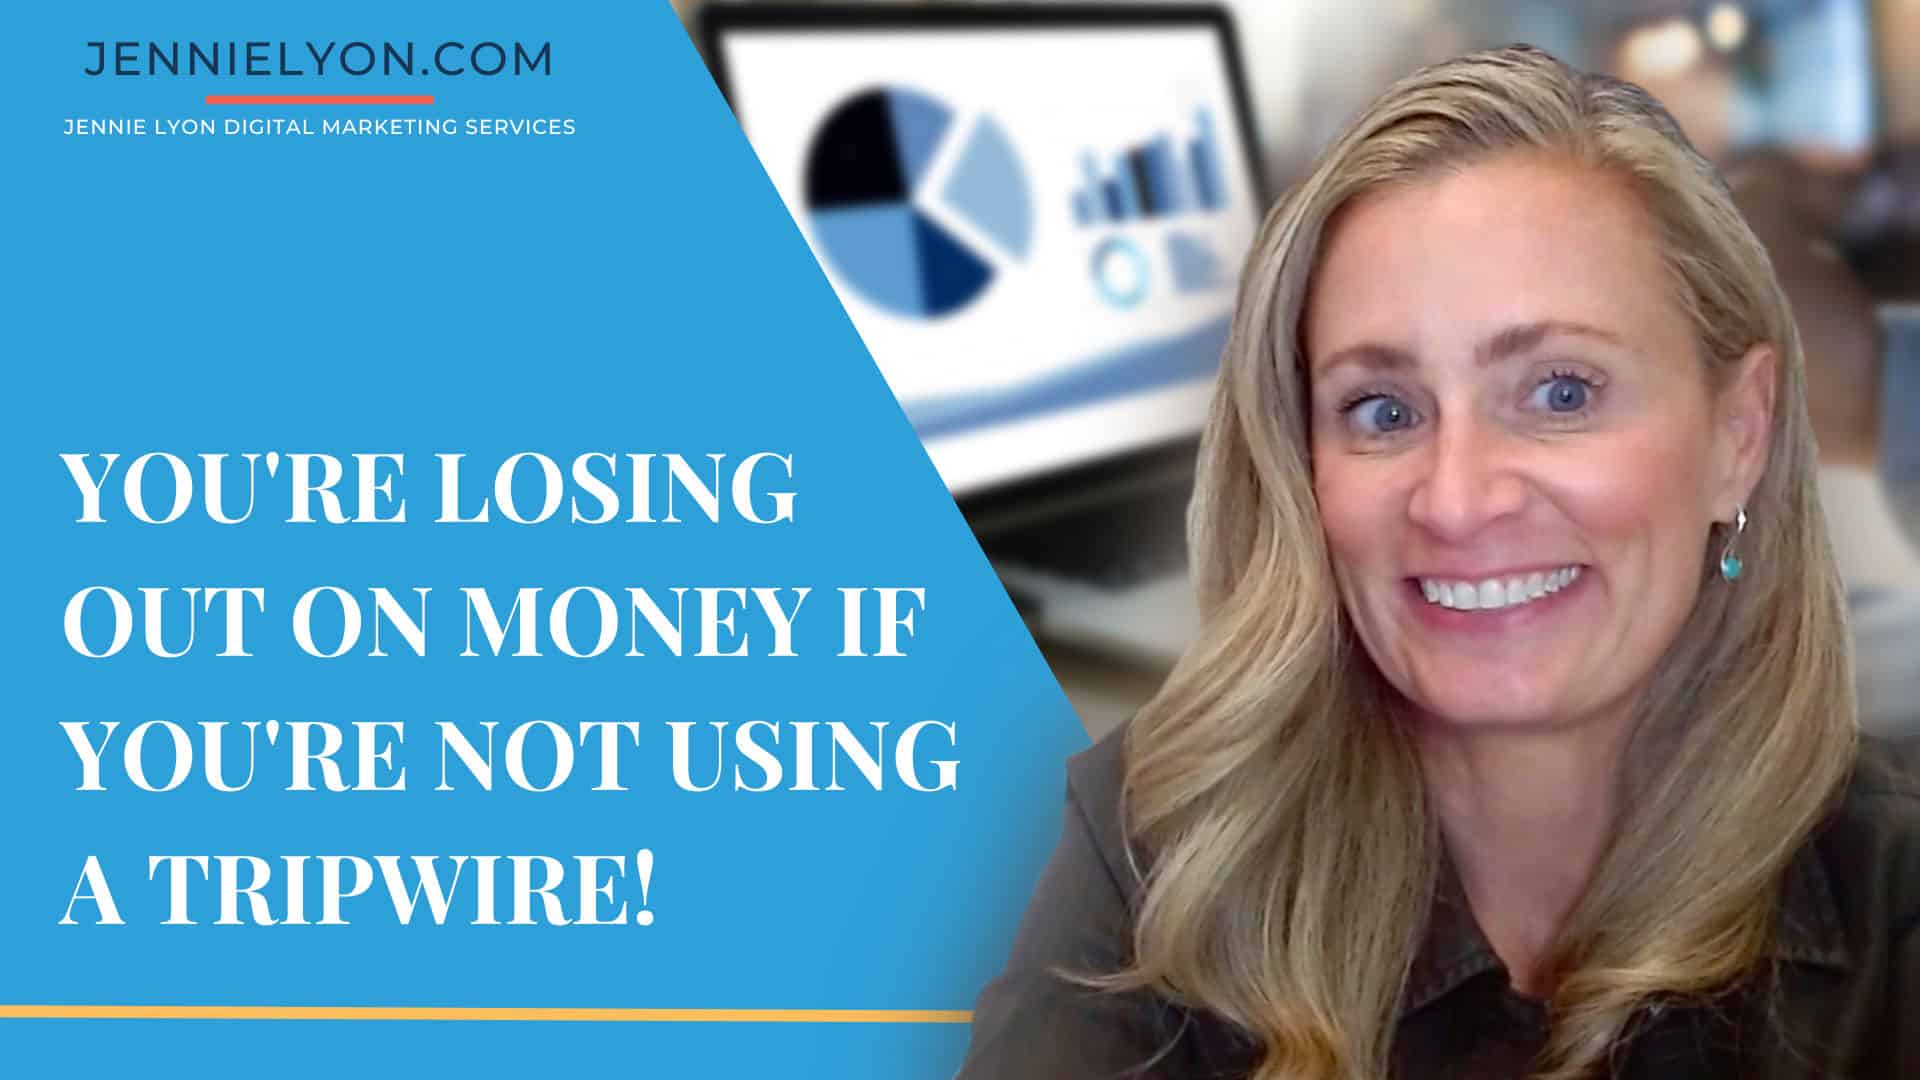 You're Losing Out on Money if You're Not Using a Tripwire!